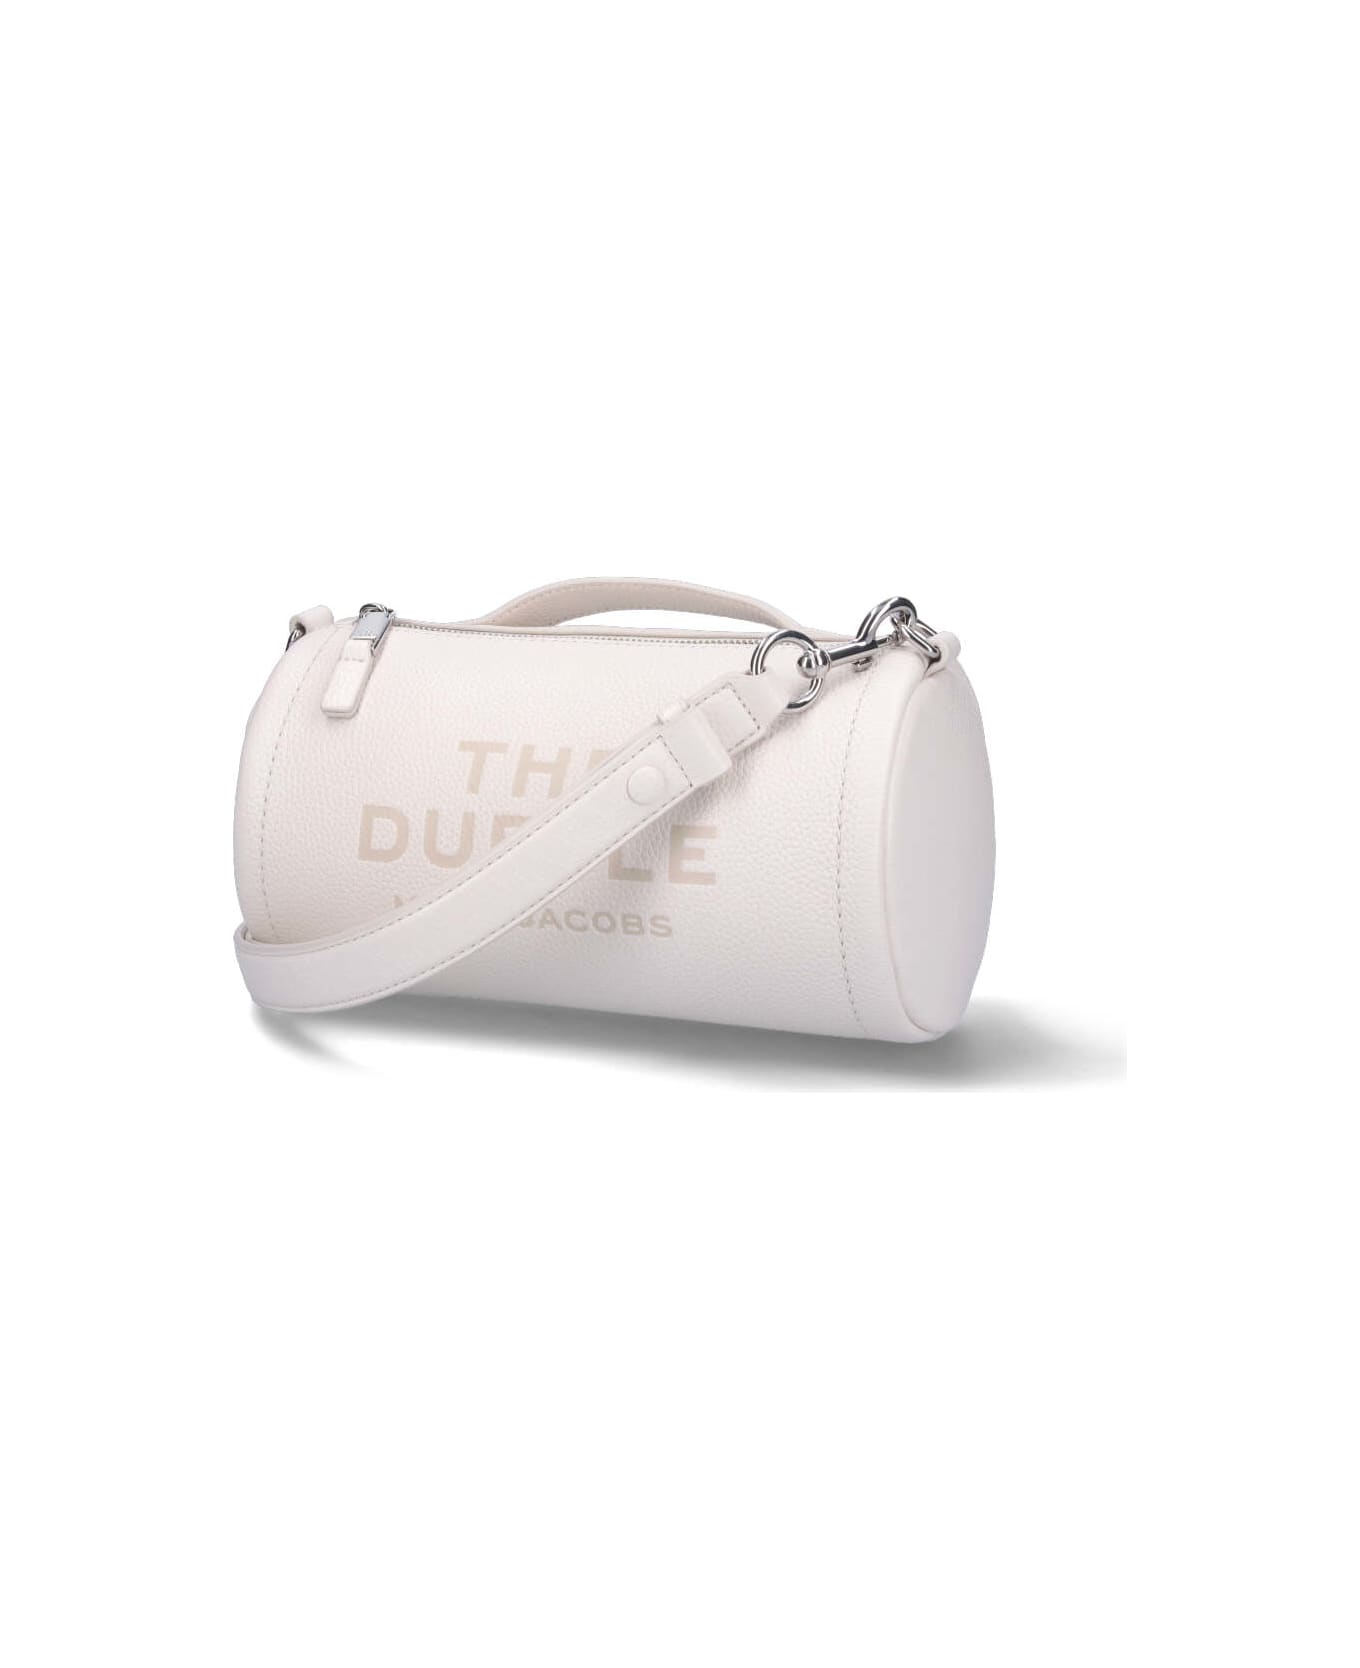 Marc Jacobs The Duffle Bag - Cream クラッチバッグ